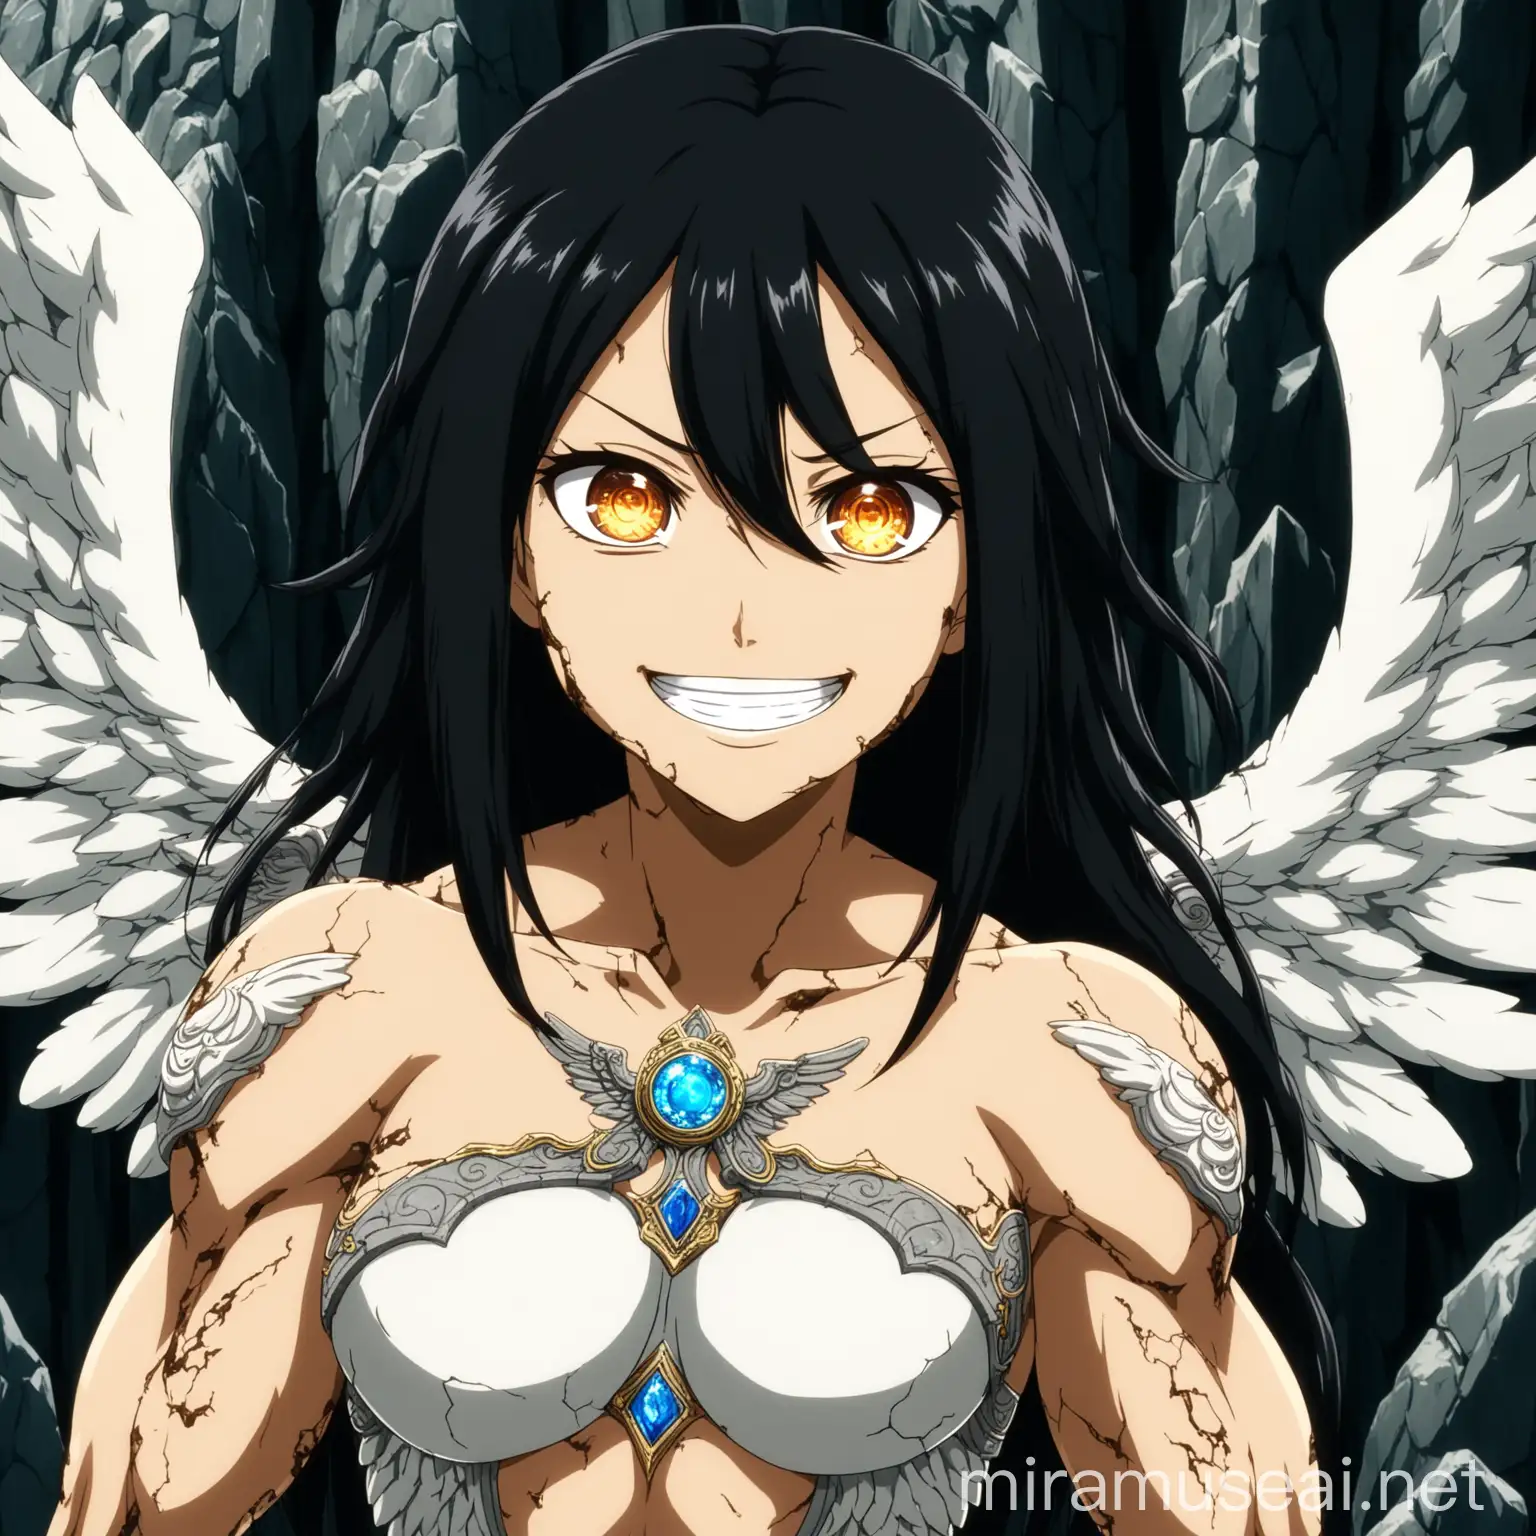 a female angel made of stone, she has stone angel wings, she is muscular, her skin is composed by stone and mineral veins even in face, she has wild black hair, she has white lumionus eyes. she has a crazy smile on her face. in anime